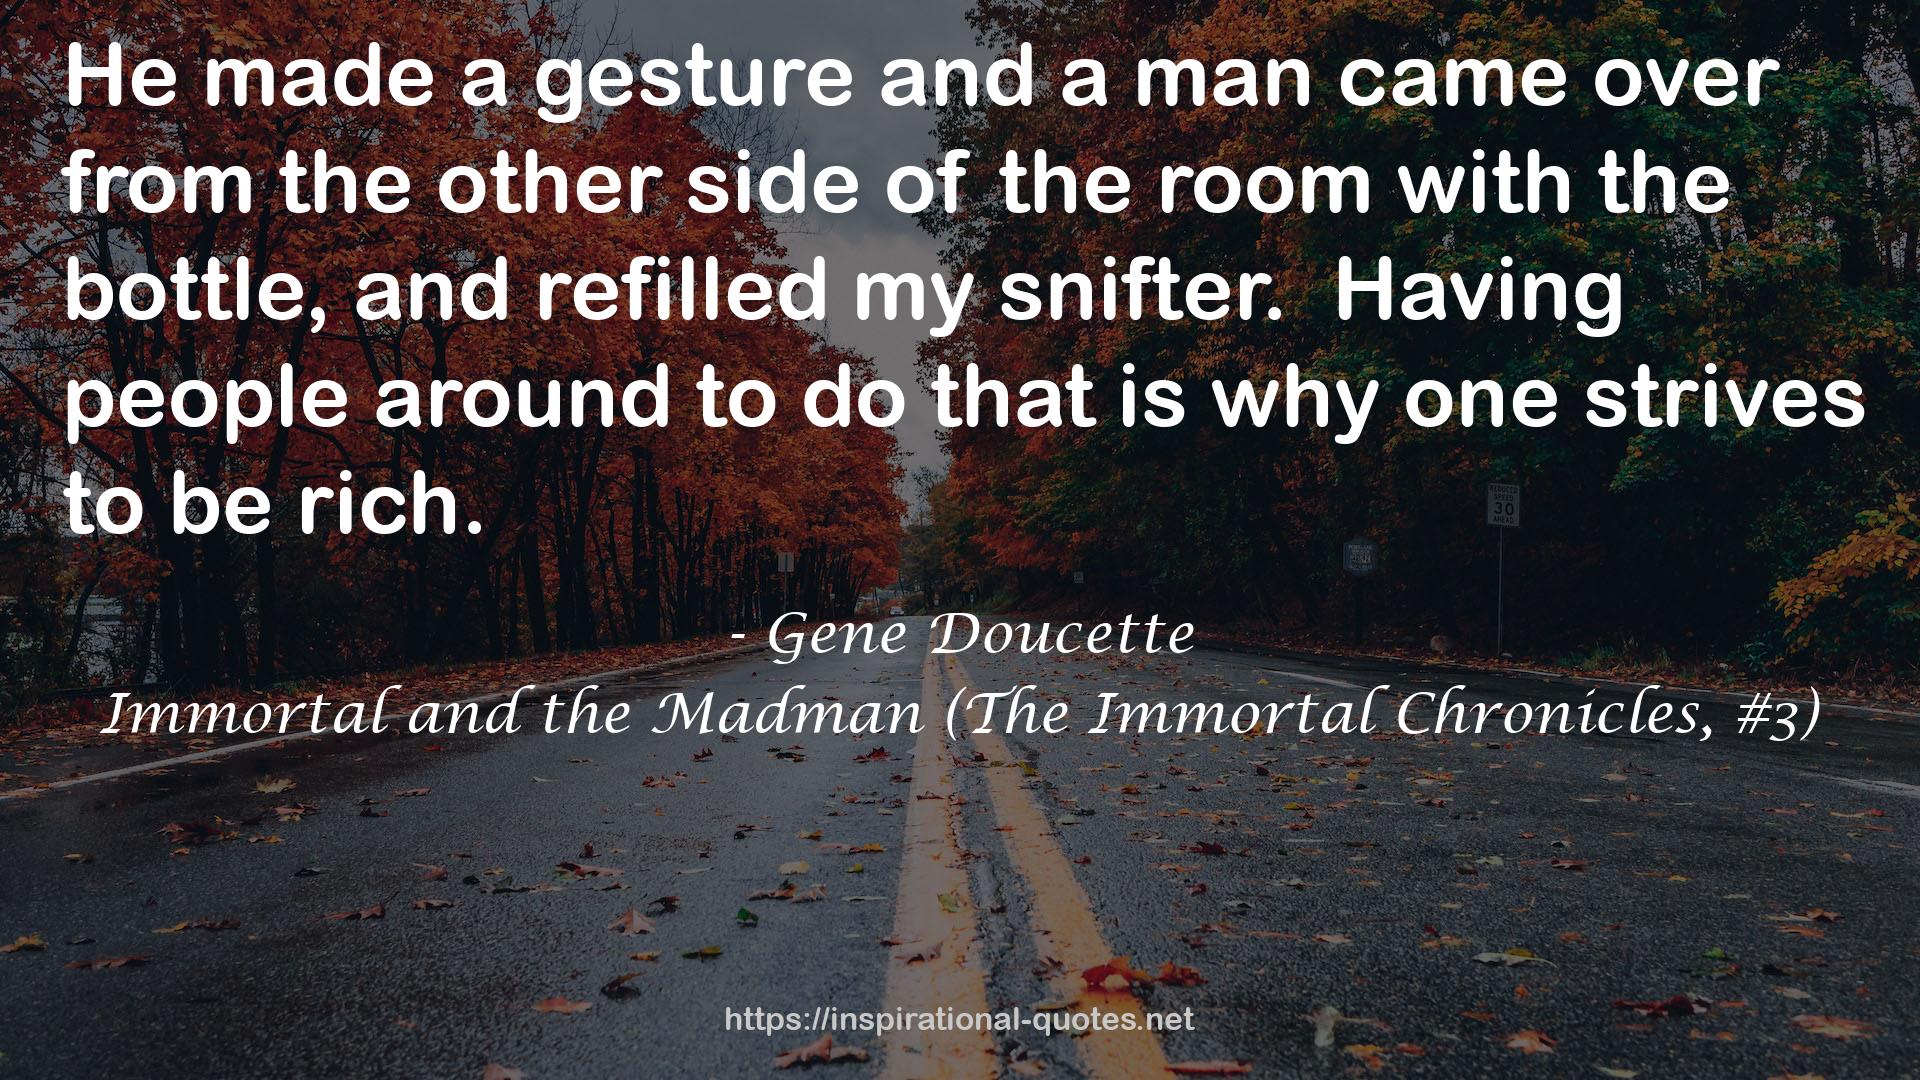 Immortal and the Madman (The Immortal Chronicles, #3) QUOTES